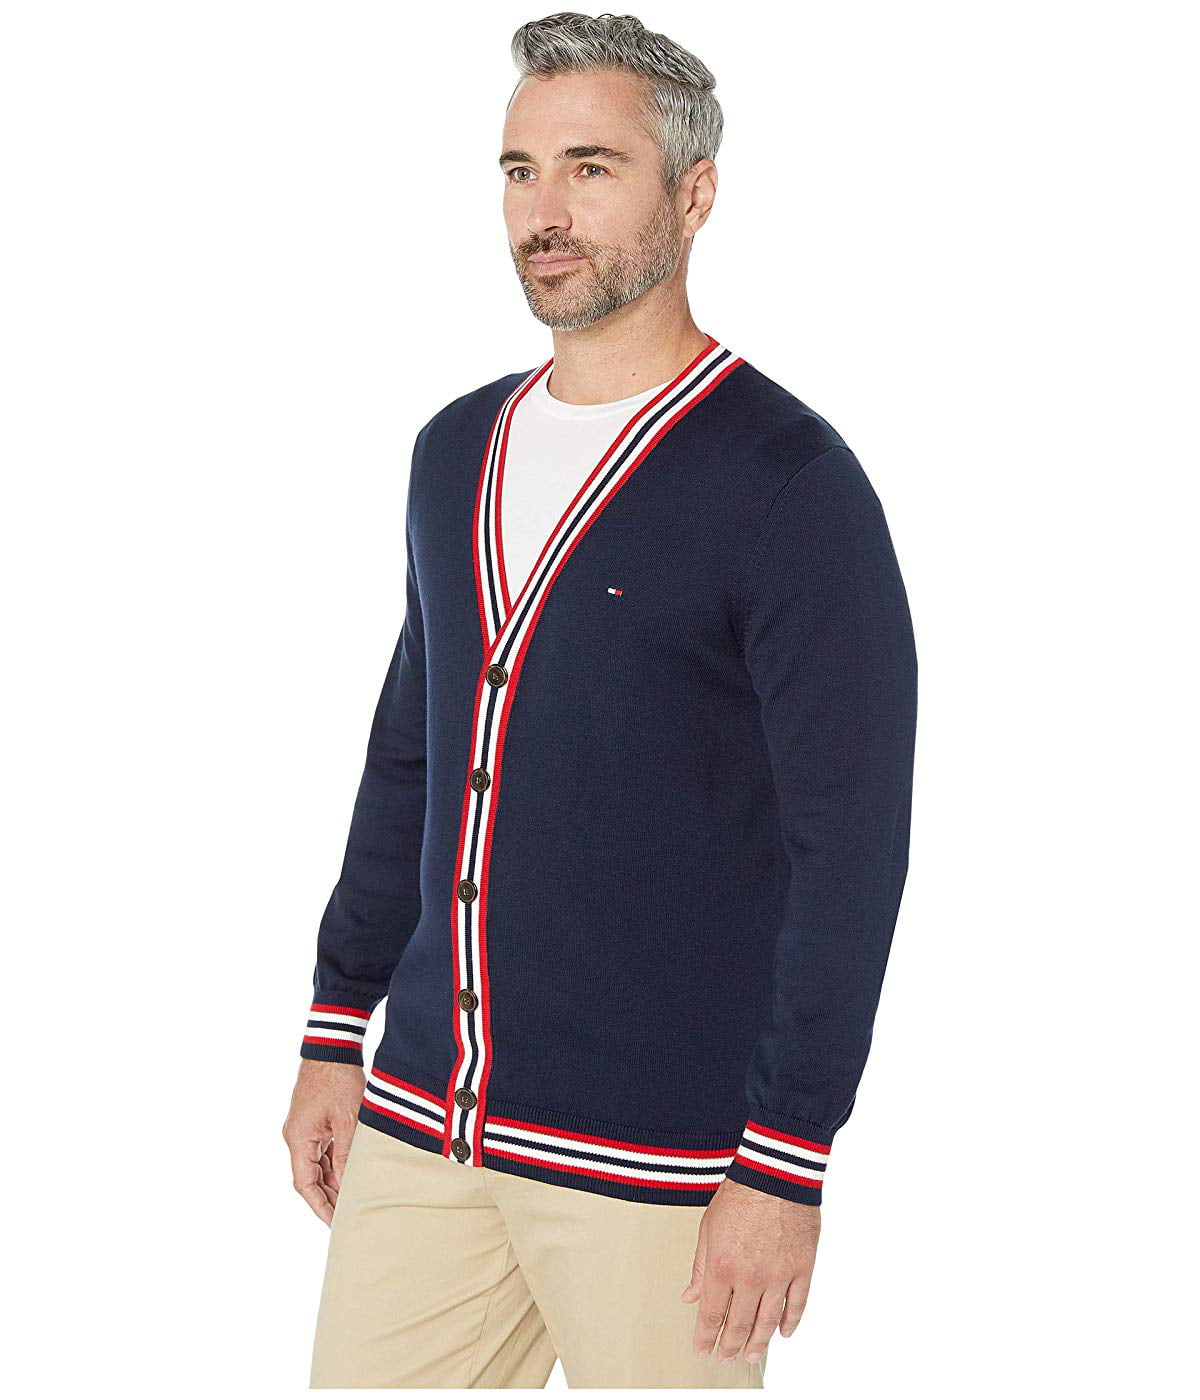 Tommy Hilfiger Adaptive Cardigan Sweater with Magnetic Buttons Navy Blazer Multi -